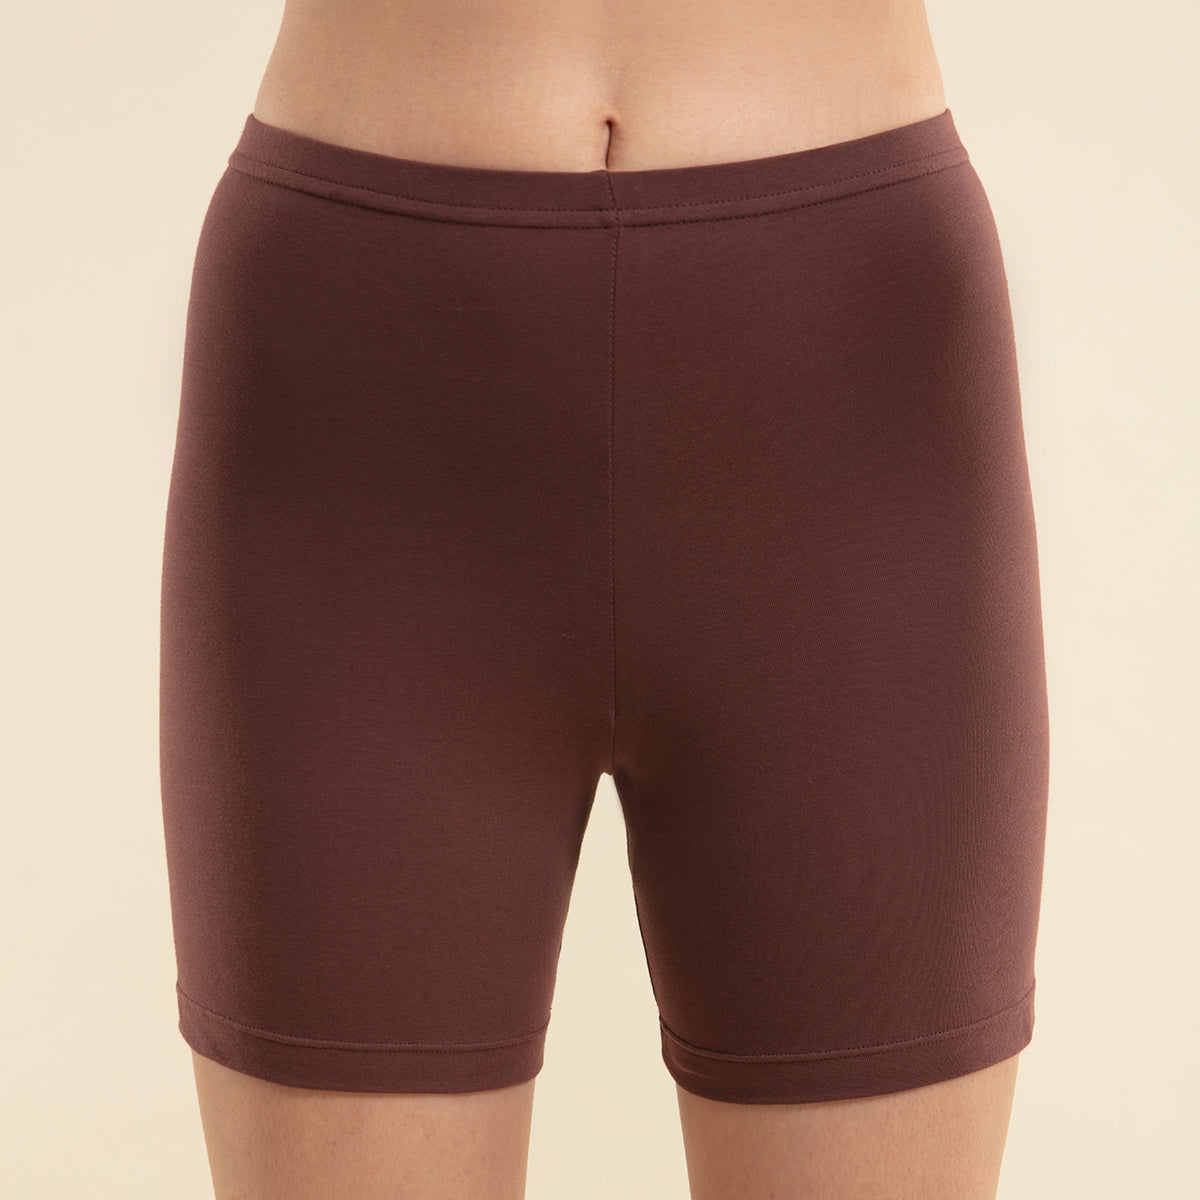 Nykd by Nykaa Stretch cotton cycling shorts - Chocolate Brown NYP083